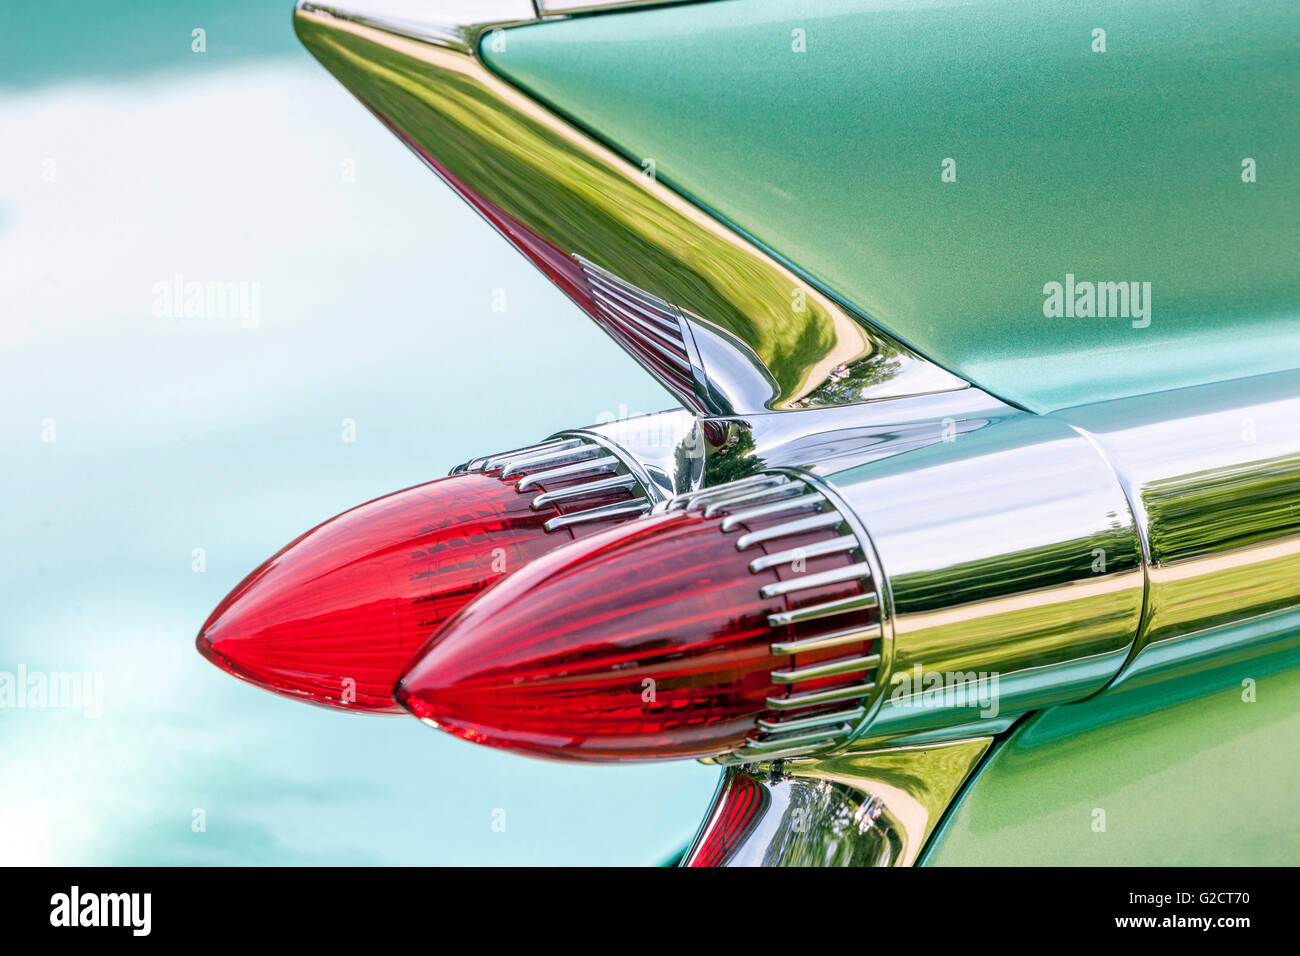 Cadillac Fleetwood 1959, American classic vintage car tail light Stock Photo